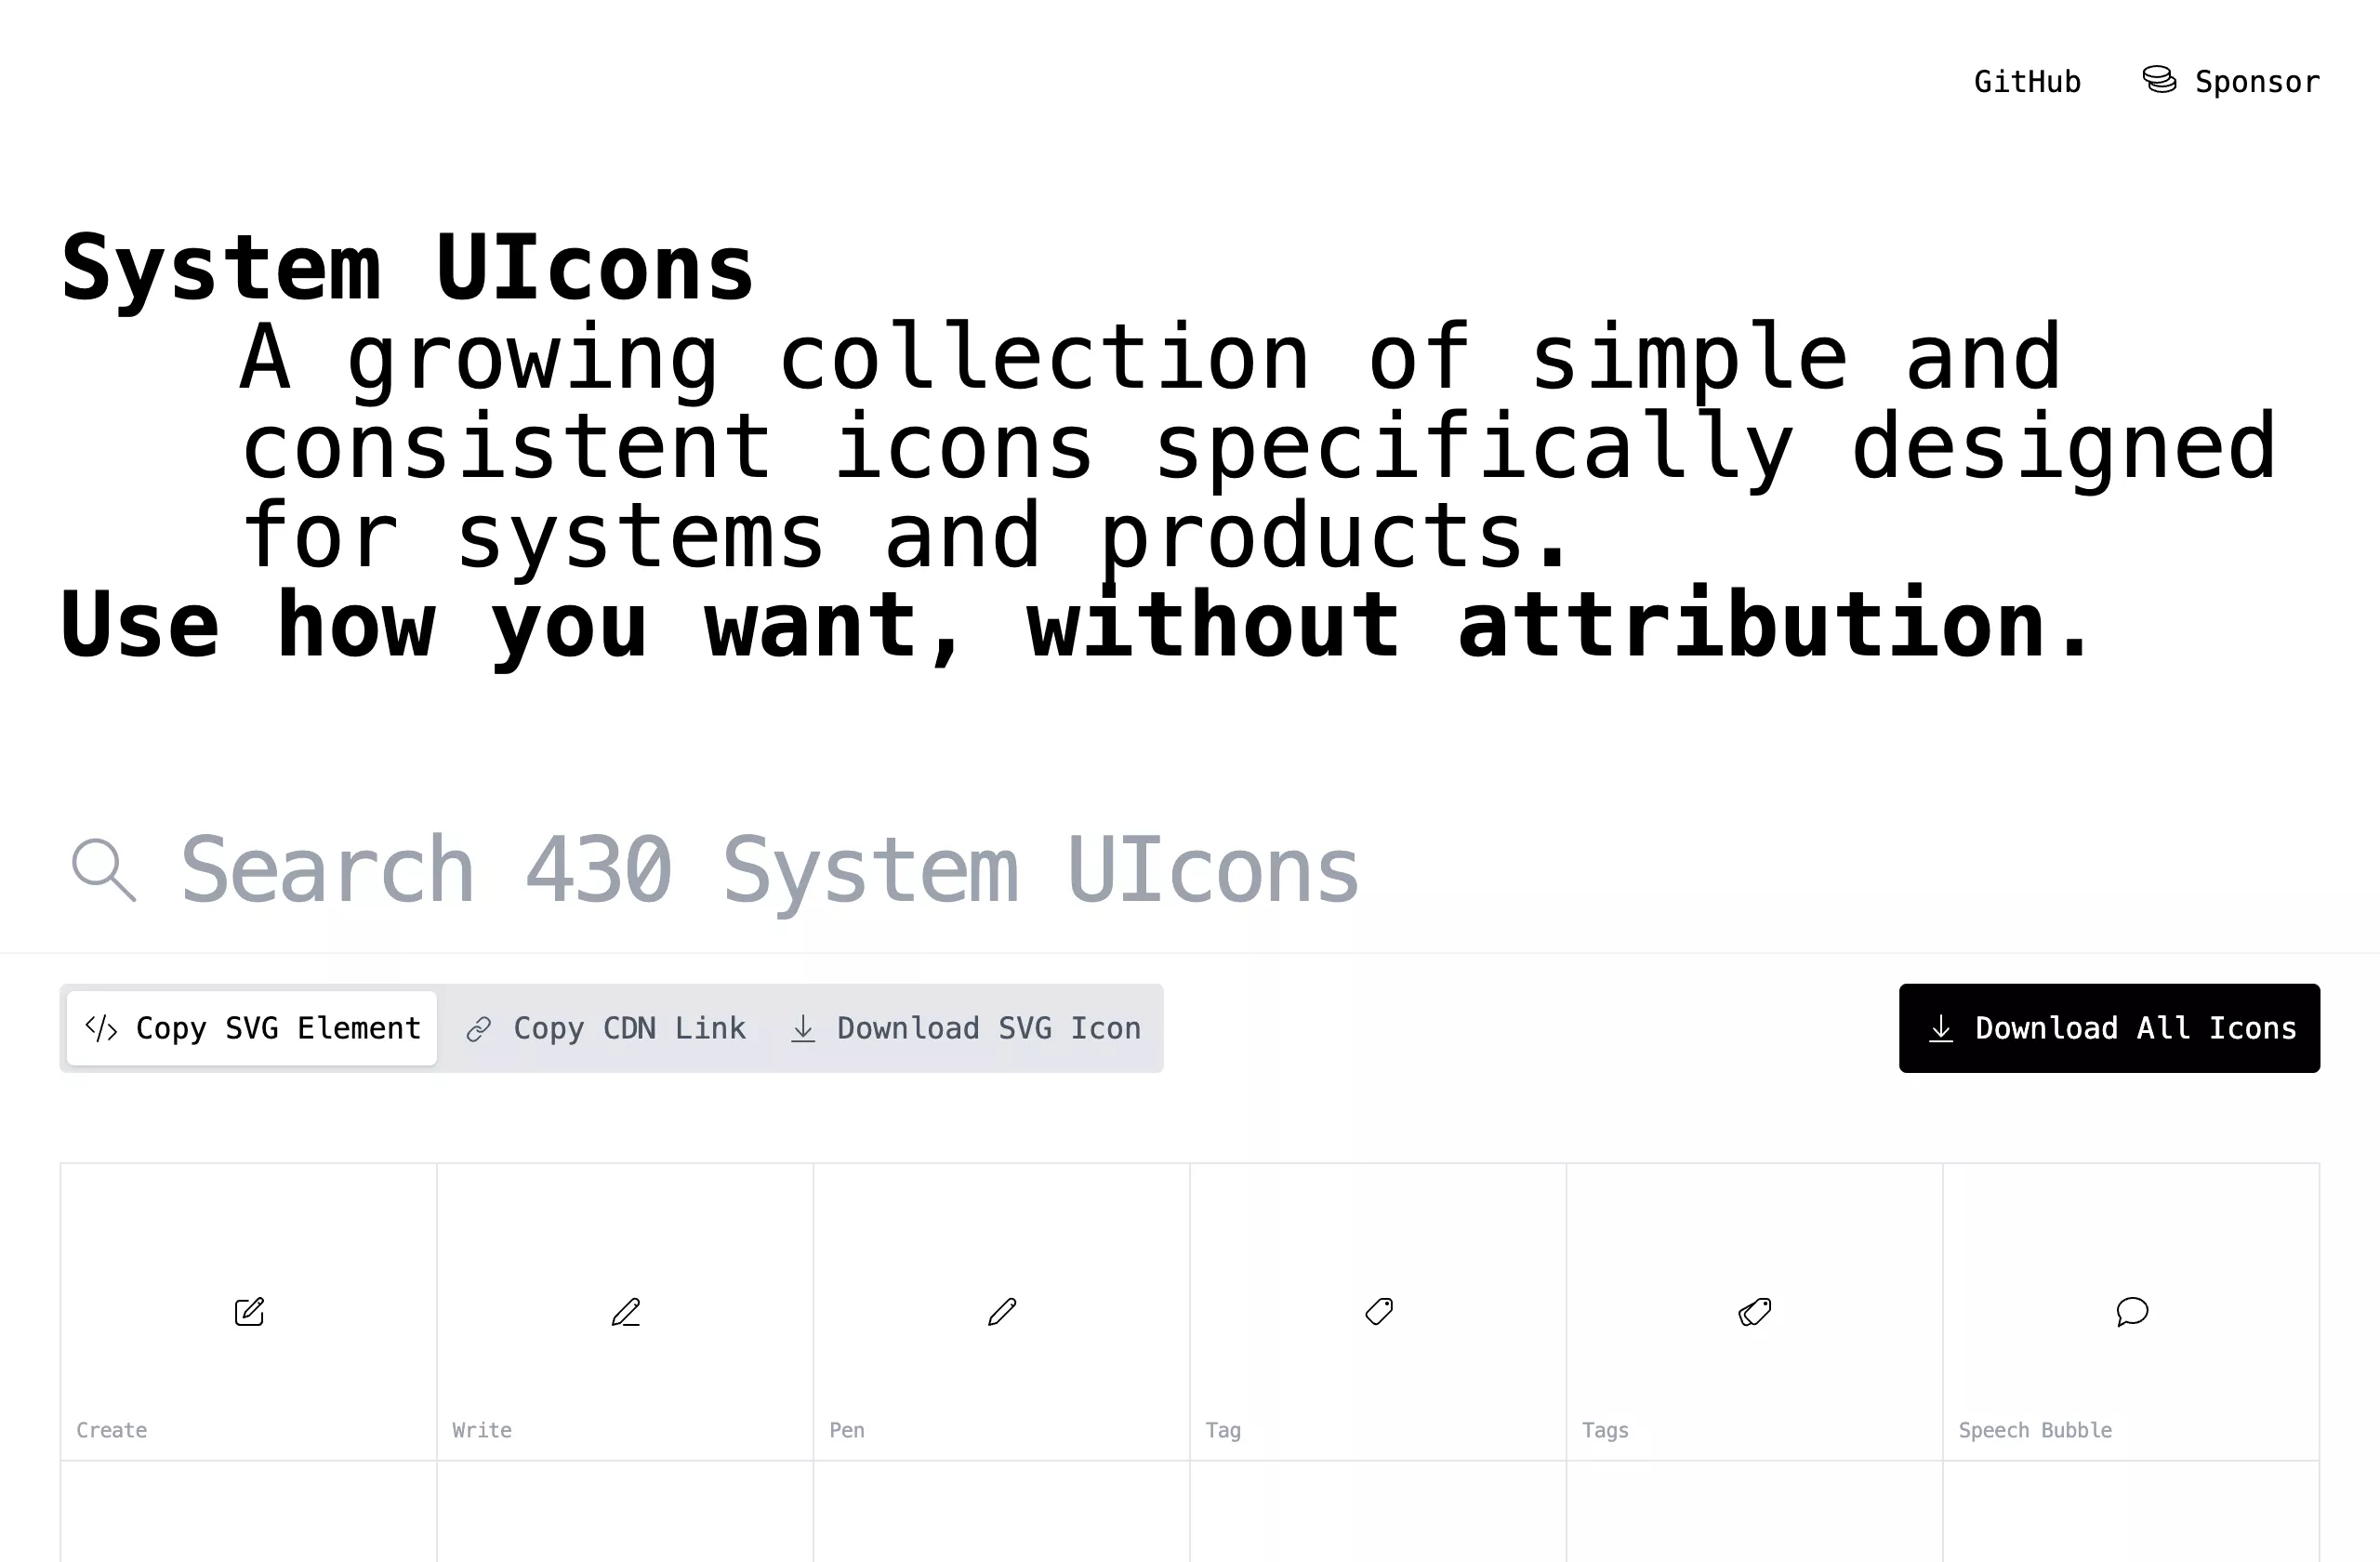 System UIcons